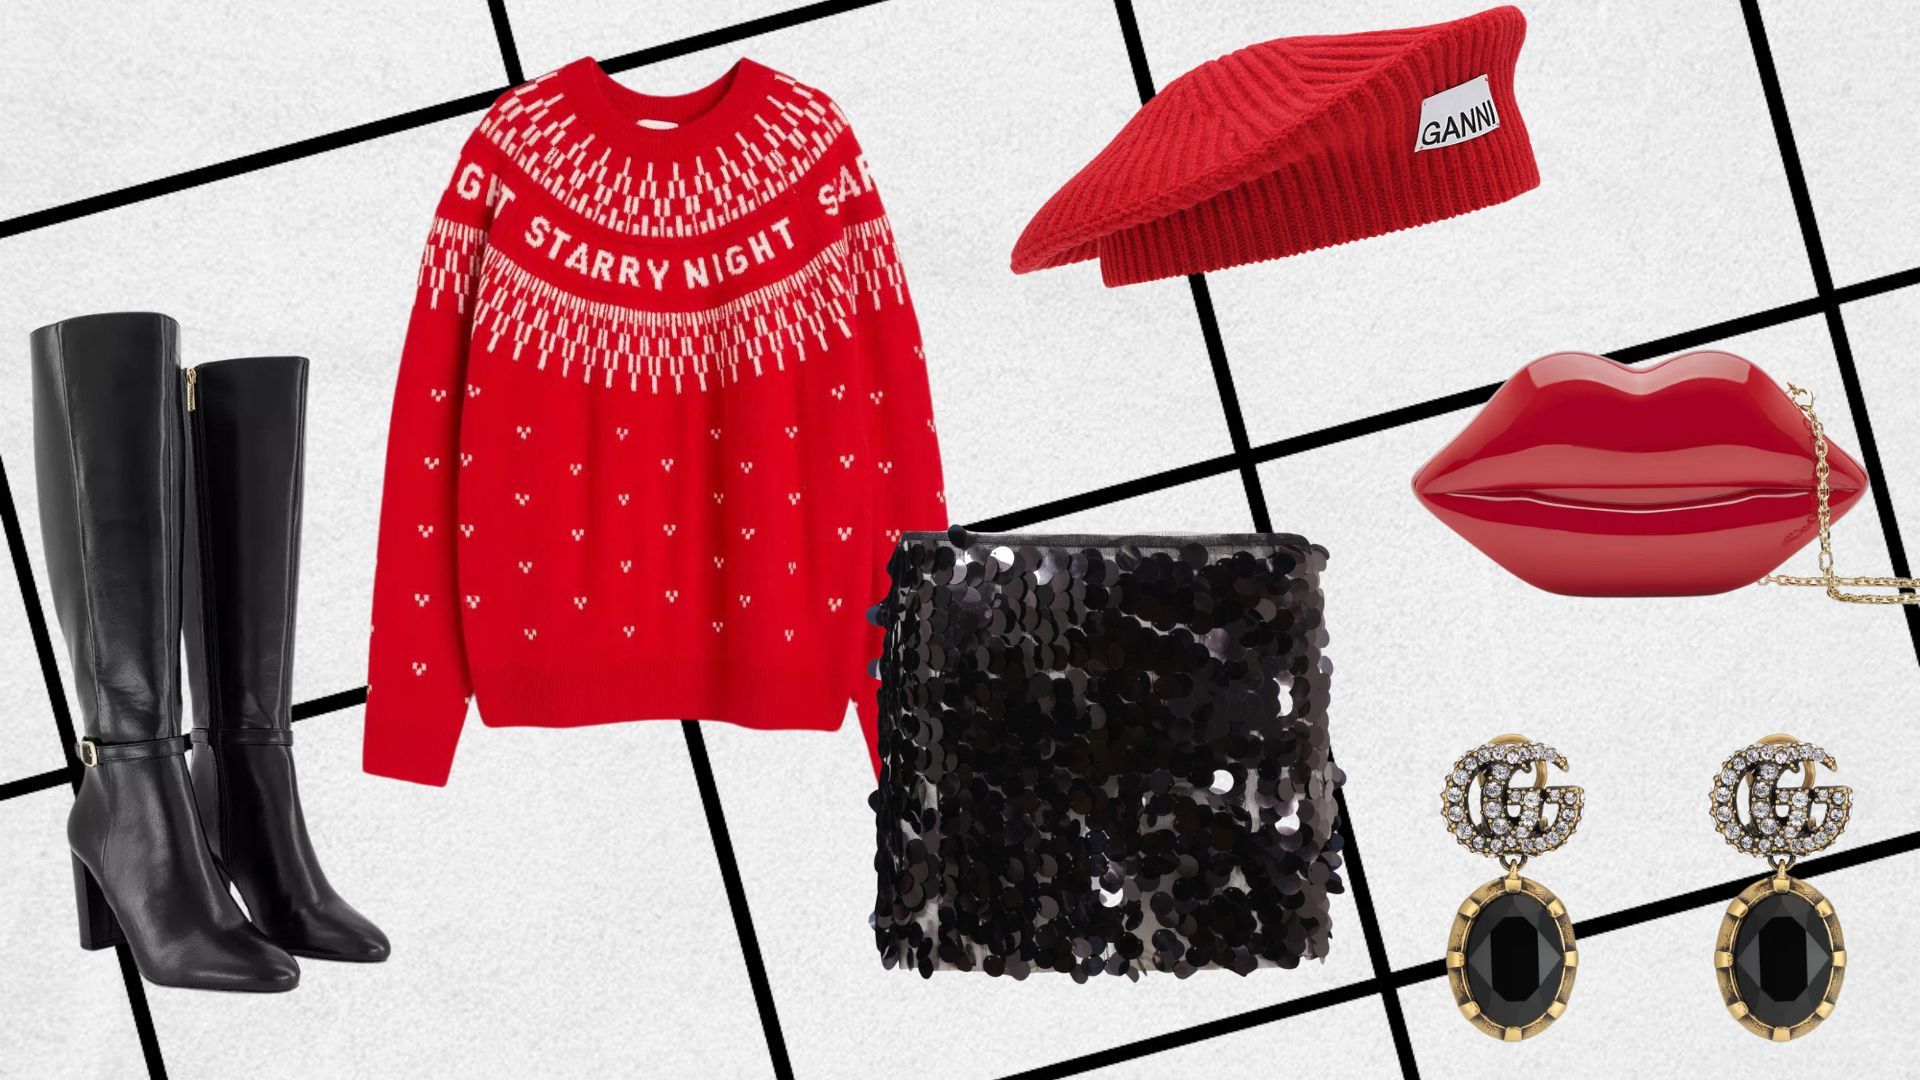 How to wear a Christmas jumper and still look categorically chic